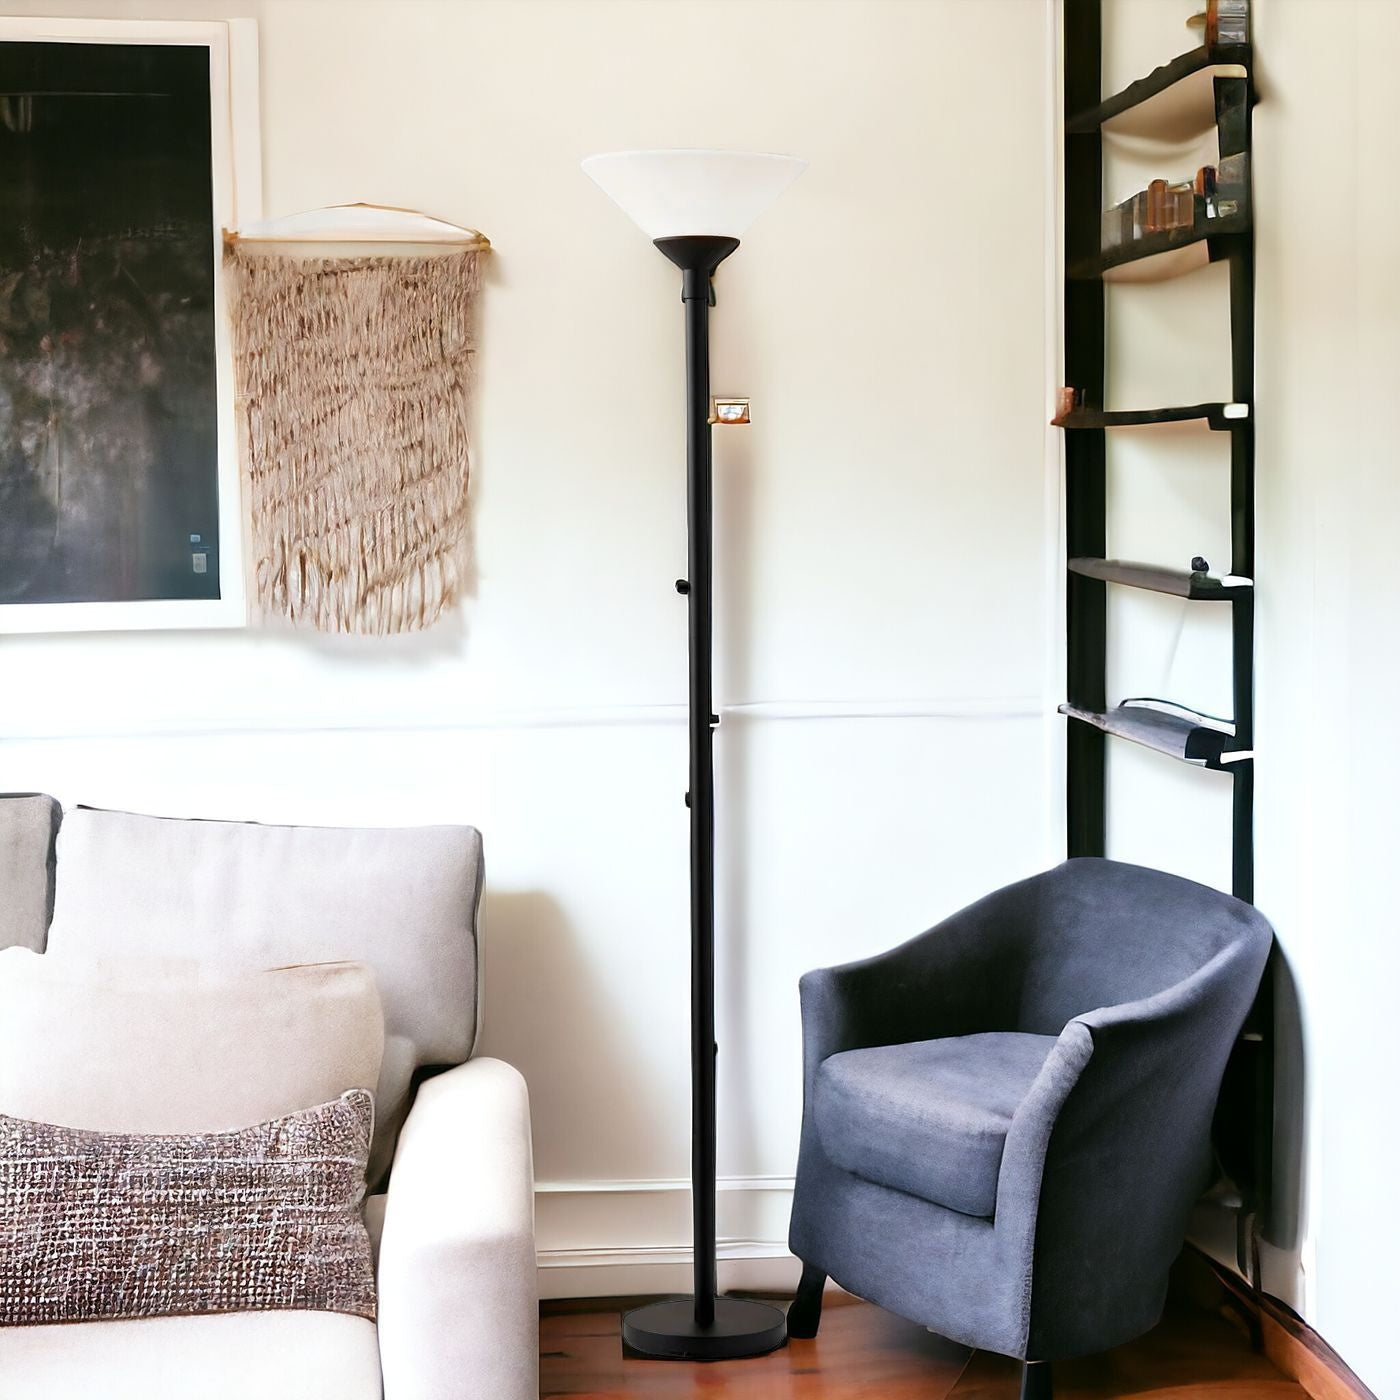 73" Black Torchiere Floor Lamp With White Cone Shade